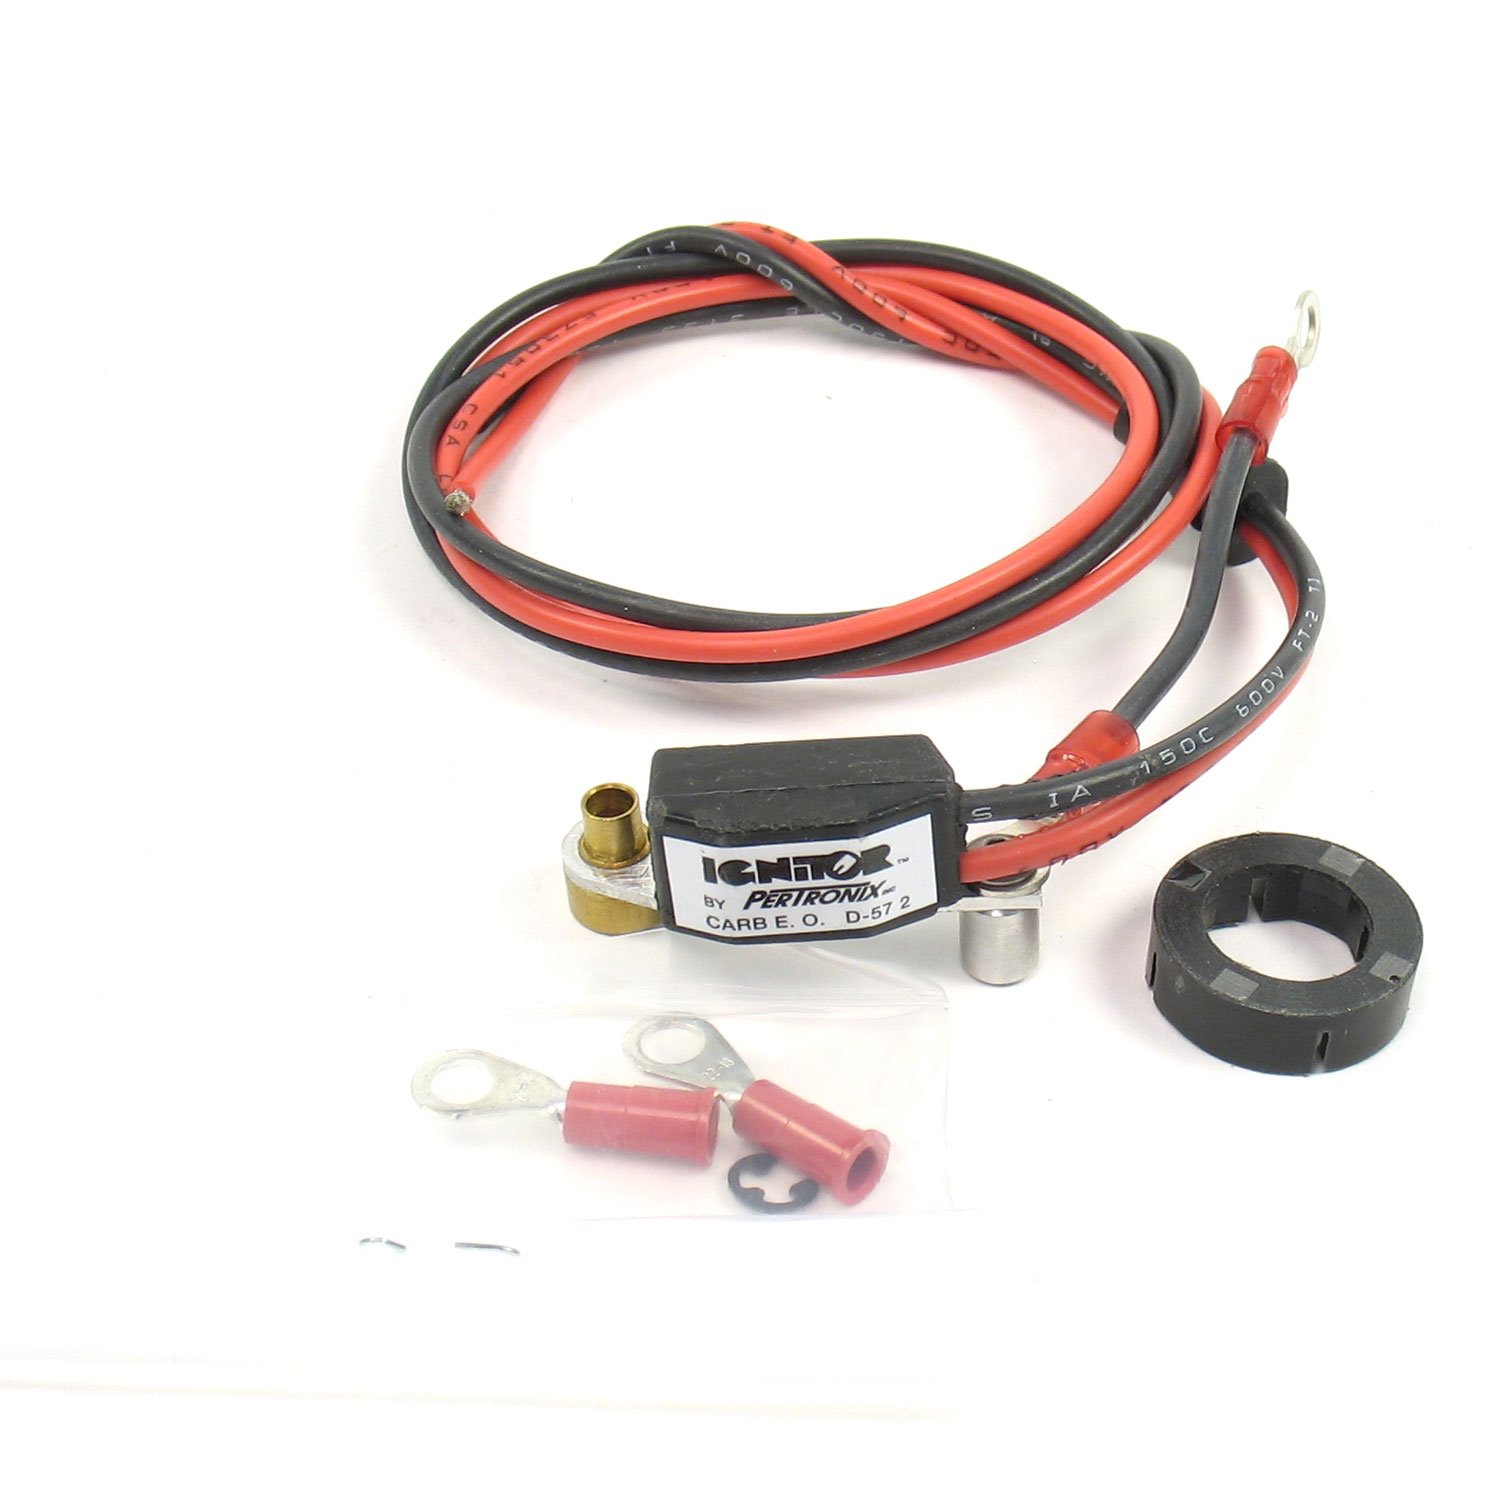 Ignition Ignitor Ducellier 4 cyl Carb Approved D-57-22